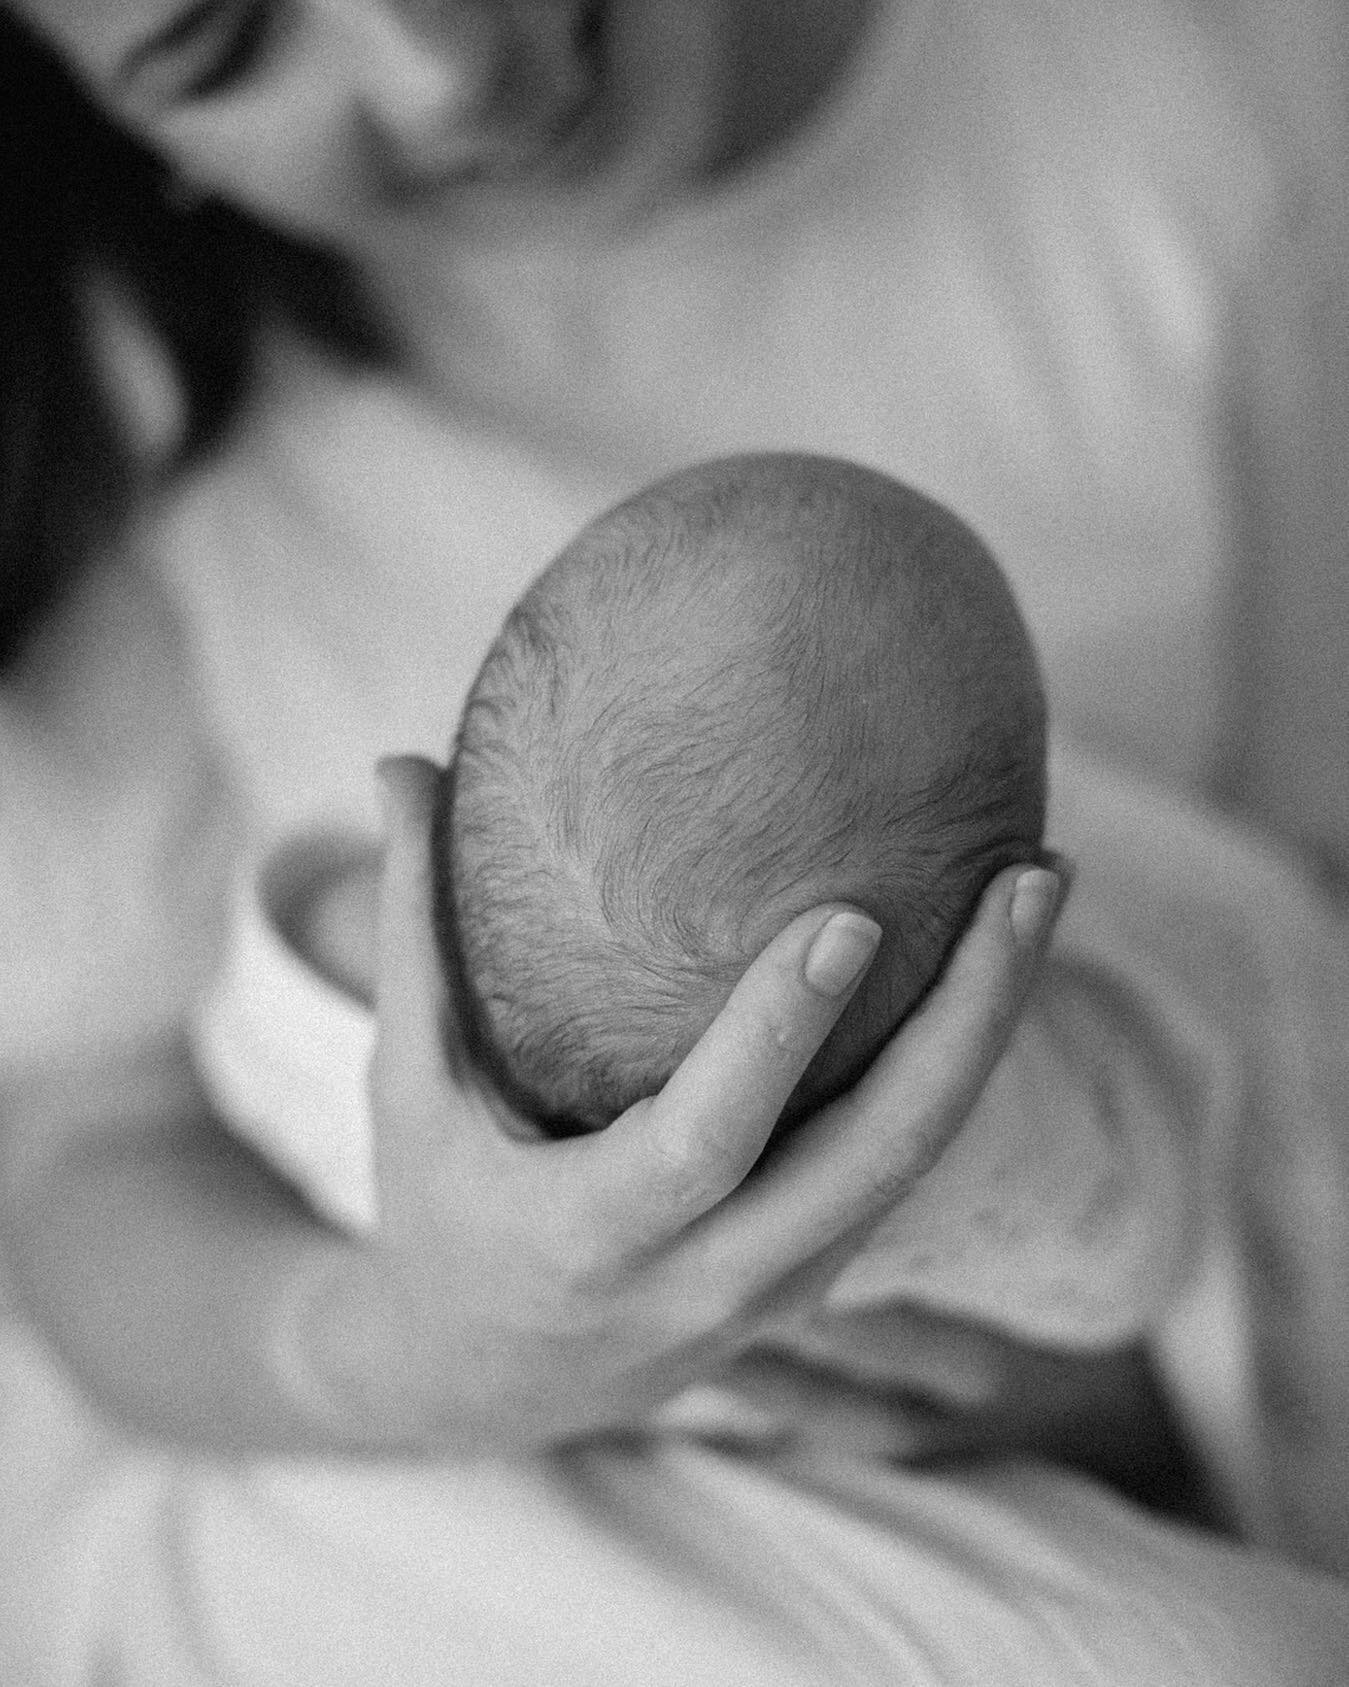 Your whole world, in your hands. x 
⠀⠀⠀⠀⠀⠀⠀⠀⠀
⠀⠀⠀⠀⠀⠀⠀⠀⠀
⠀⠀⠀⠀⠀⠀⠀⠀⠀
⠀⠀⠀⠀⠀⠀⠀⠀⠀
⠀⠀⠀⠀⠀⠀⠀⠀⠀
⠀⠀⠀⠀⠀⠀⠀⠀⠀
⠀⠀⠀⠀⠀⠀⠀⠀⠀
⠀⠀⠀⠀⠀⠀⠀⠀⠀
⠀⠀⠀⠀⠀⠀⠀⠀⠀
⠀⠀⠀⠀⠀⠀⠀⠀⠀
#wellingtontphotographer #newbornphotographer #newbornphotos #newbornphotography #newbornphotoshoot #nauturallight